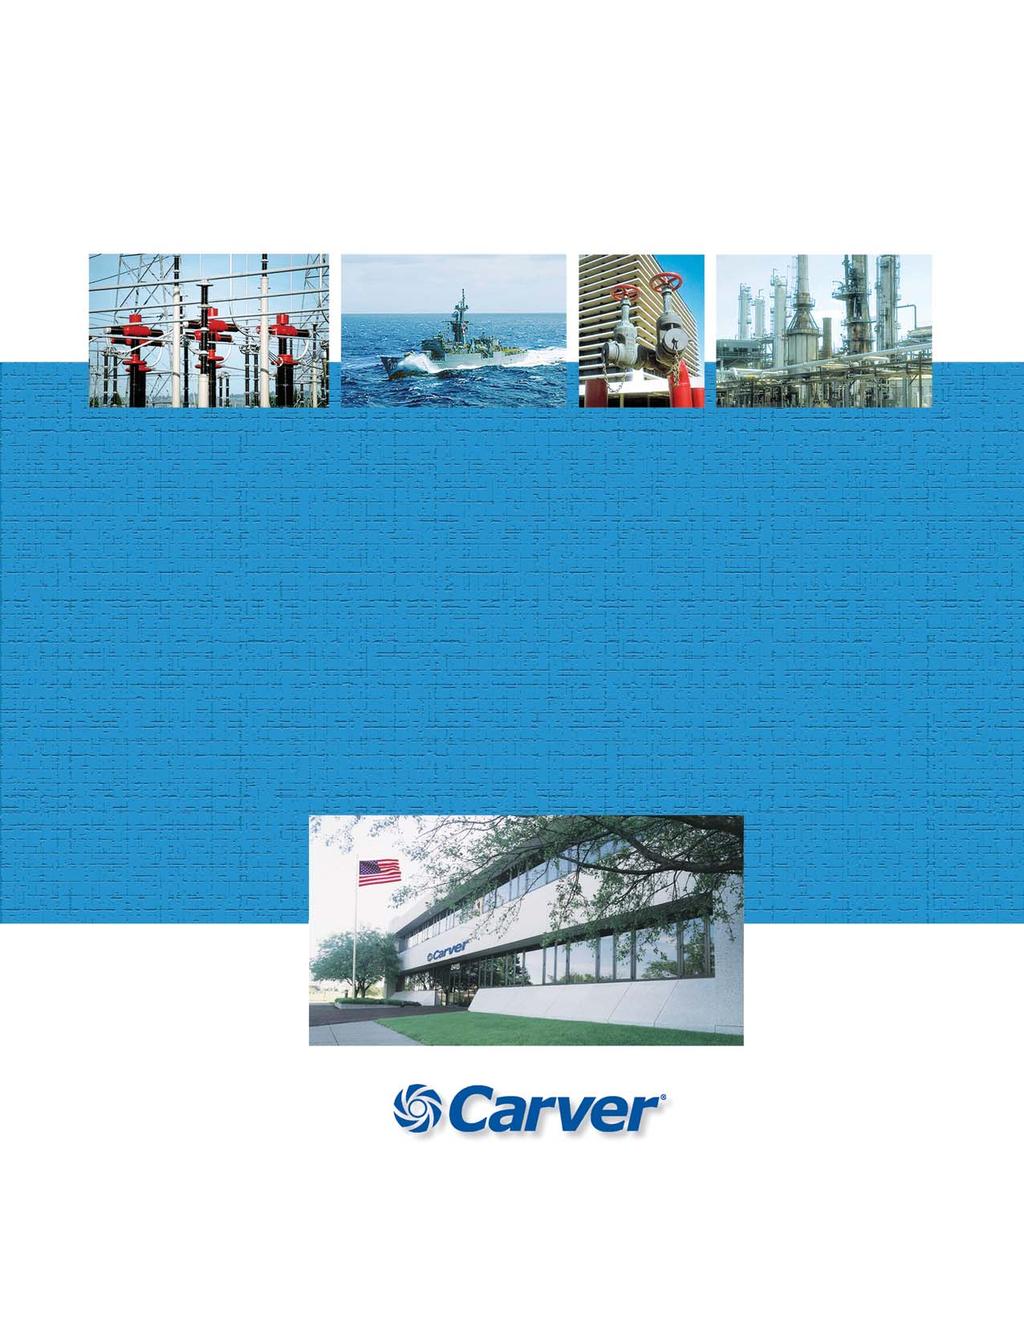 Since we built our first pumps in 1938, the Carver name has become synonymous with value.